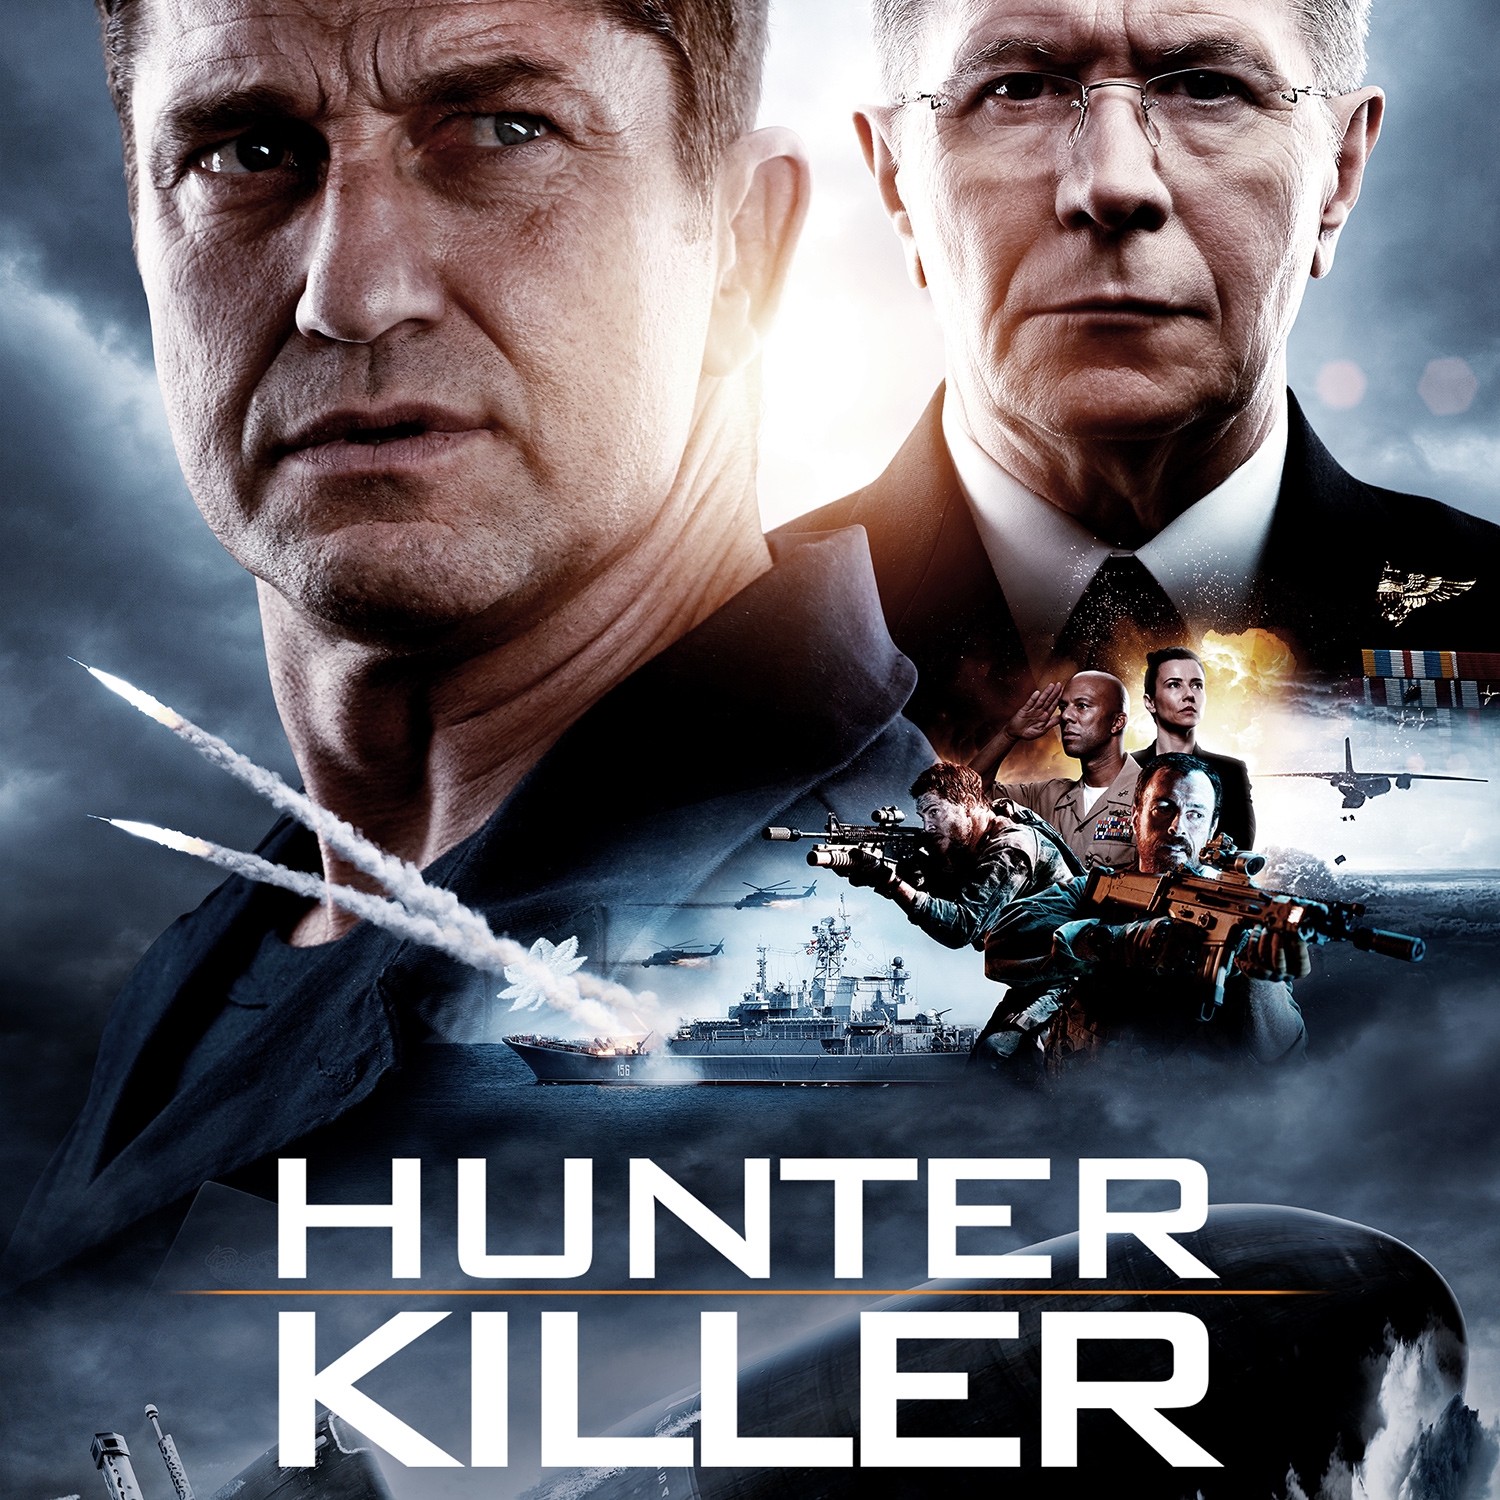 Stream Hunter Killer Online Download and Watch HD Movies Stan